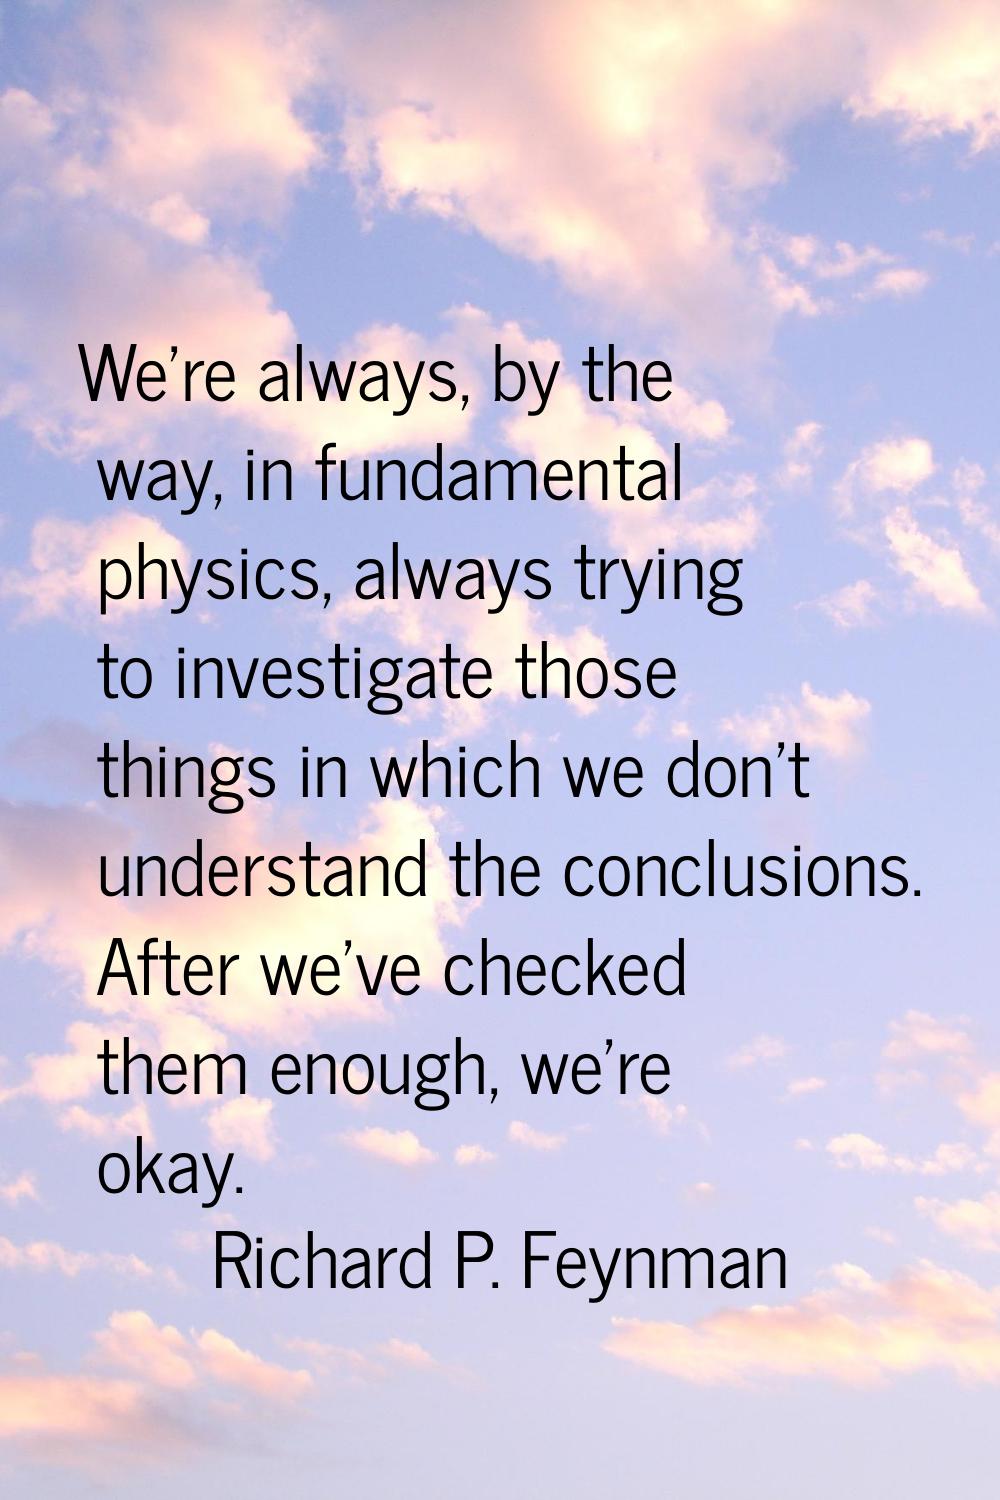 We're always, by the way, in fundamental physics, always trying to investigate those things in whic